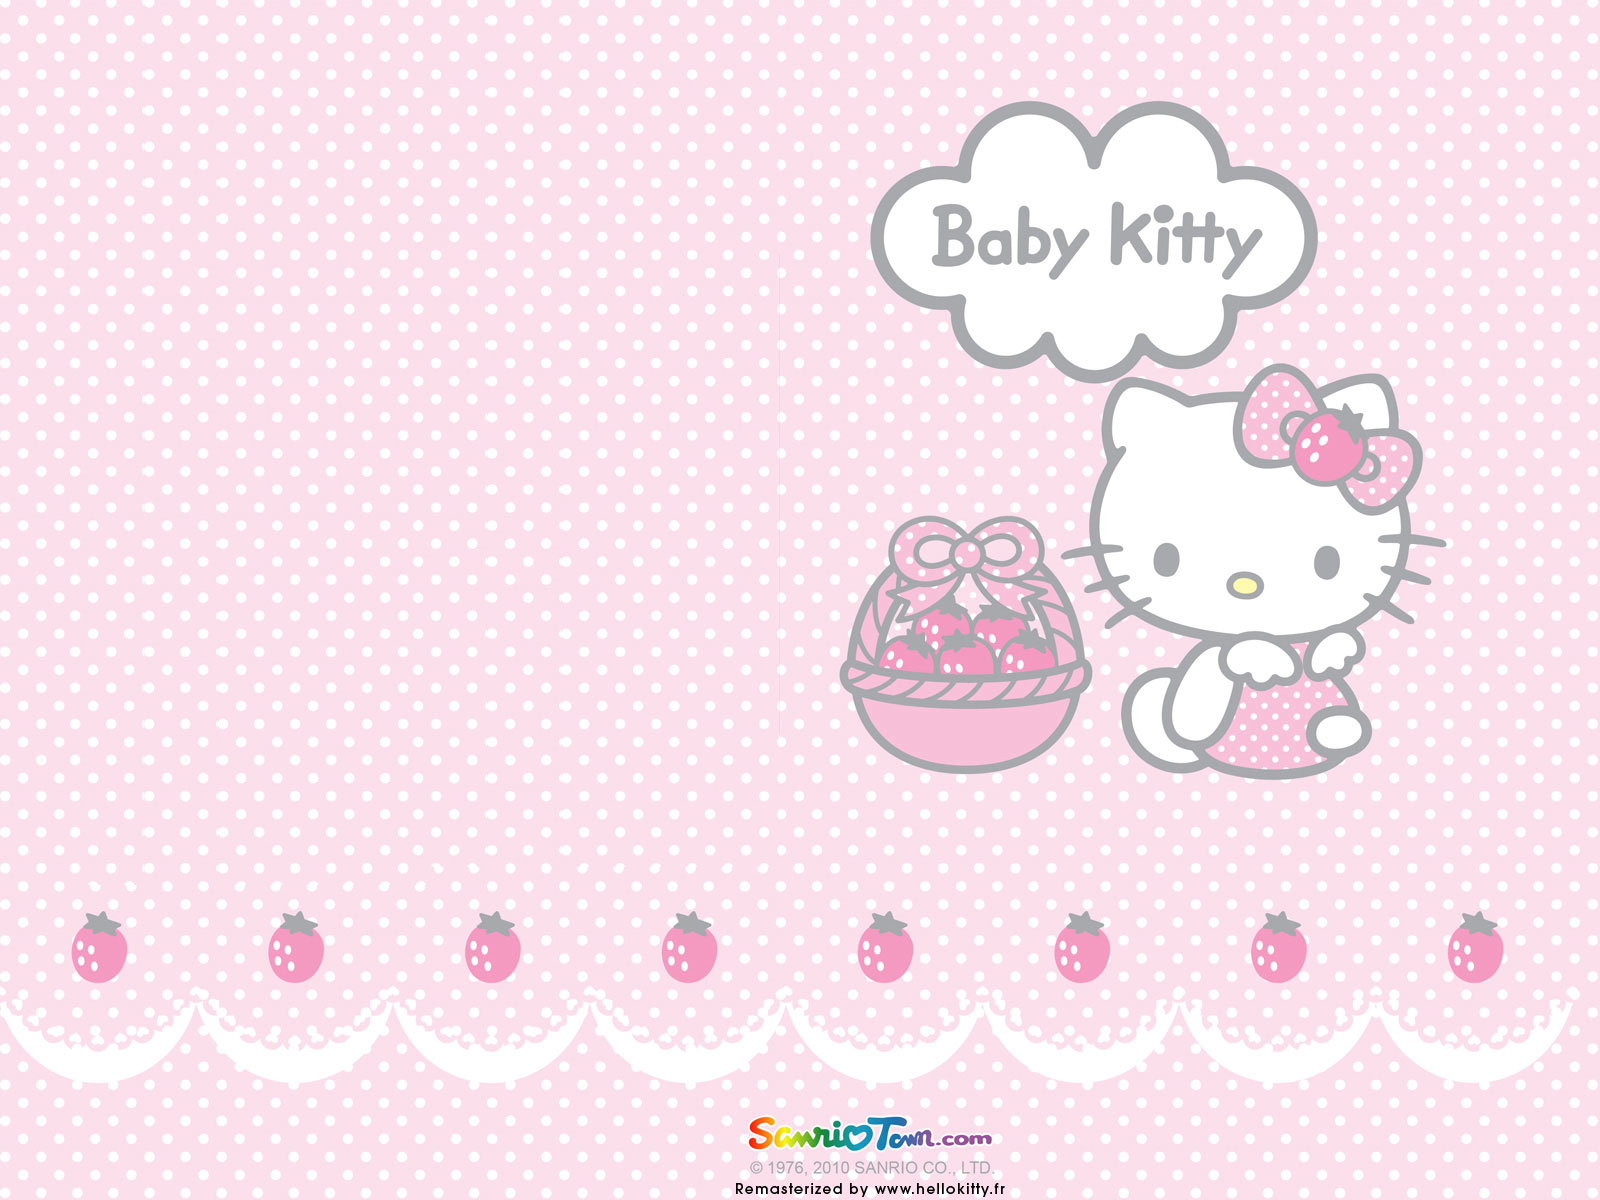 Free Download Jpeg Hello Kitty 1600 X 10 161 Kb Jpeg Baby Hello Kitty 19 X 10 1600x10 For Your Desktop Mobile Tablet Explore 76 New Hello Kitty Wallpaper